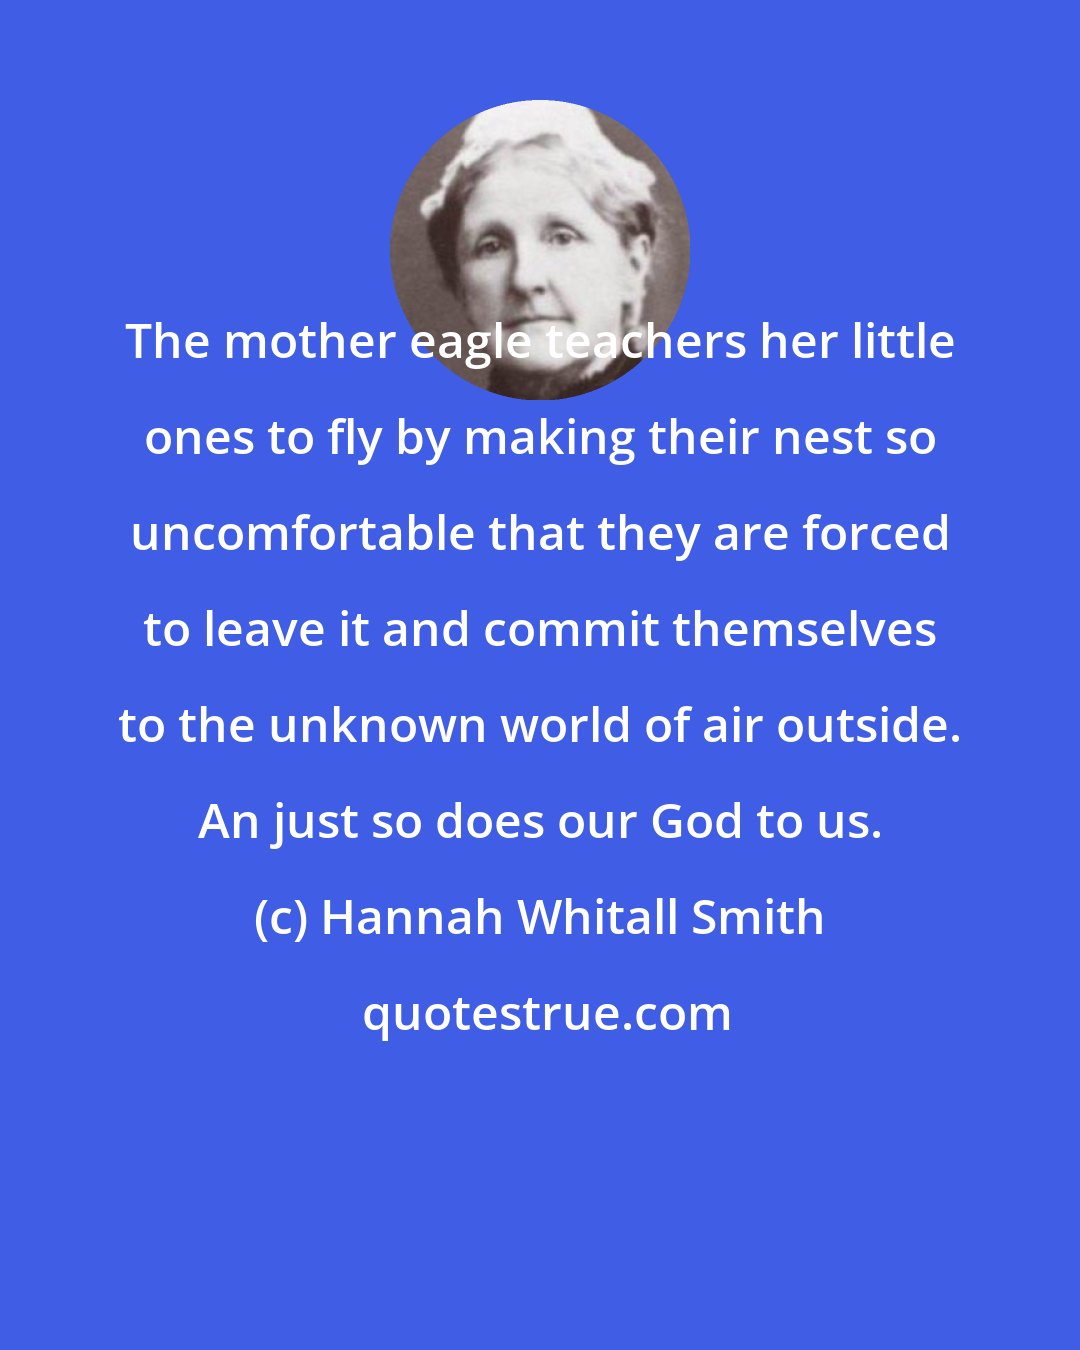 Hannah Whitall Smith: The mother eagle teachers her little ones to fly by making their nest so uncomfortable that they are forced to leave it and commit themselves to the unknown world of air outside. An just so does our God to us.